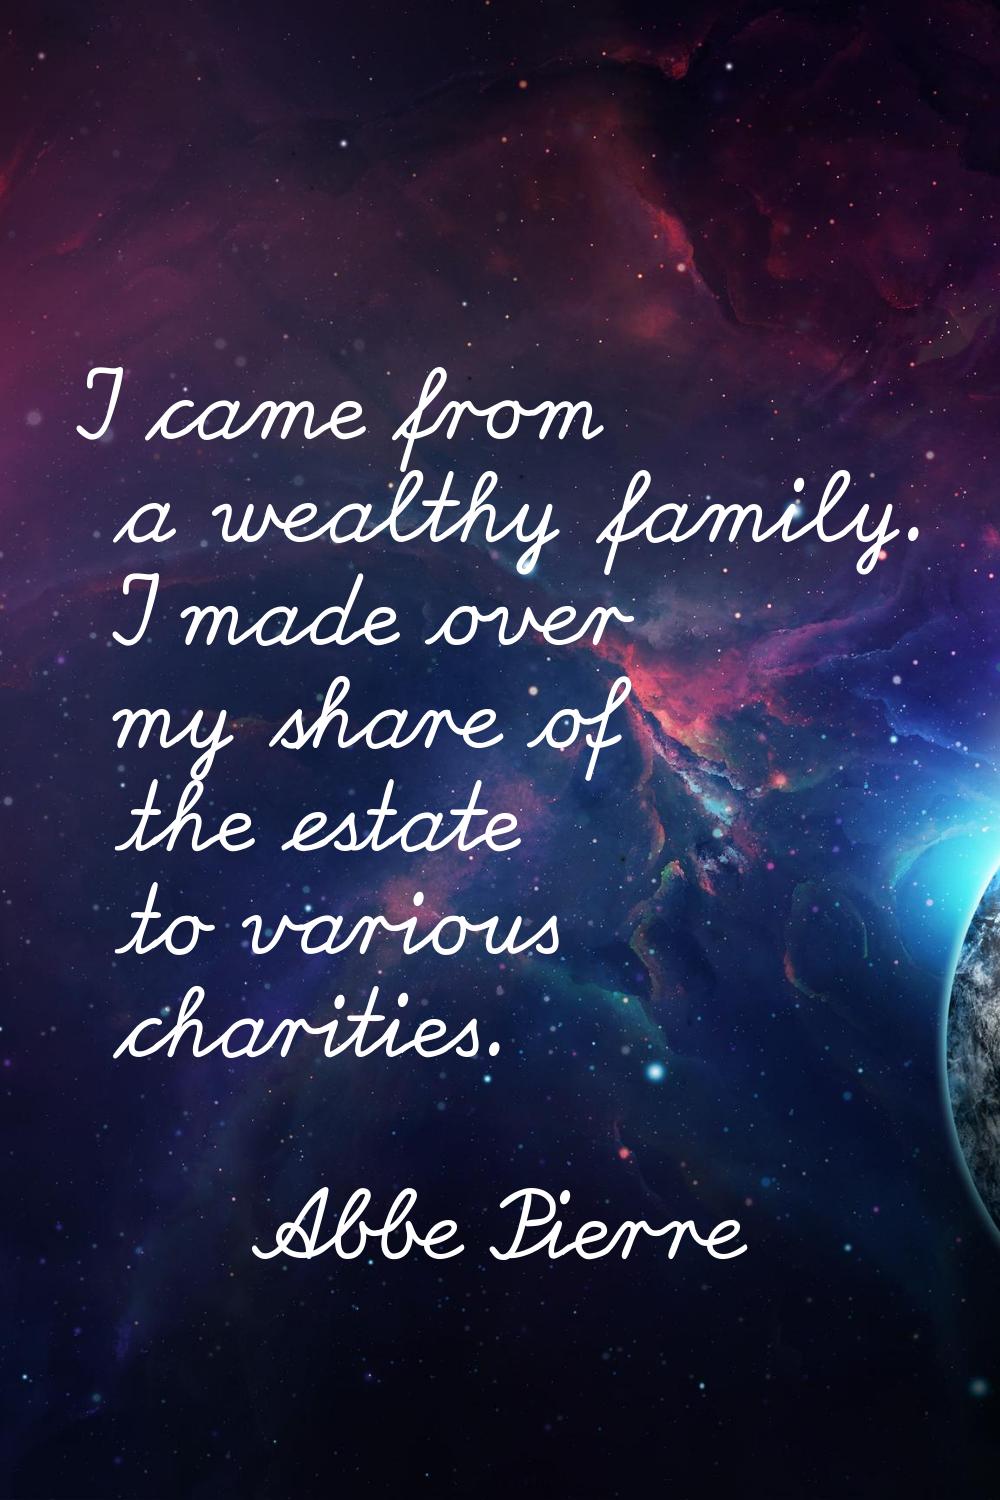 I came from a wealthy family. I made over my share of the estate to various charities.